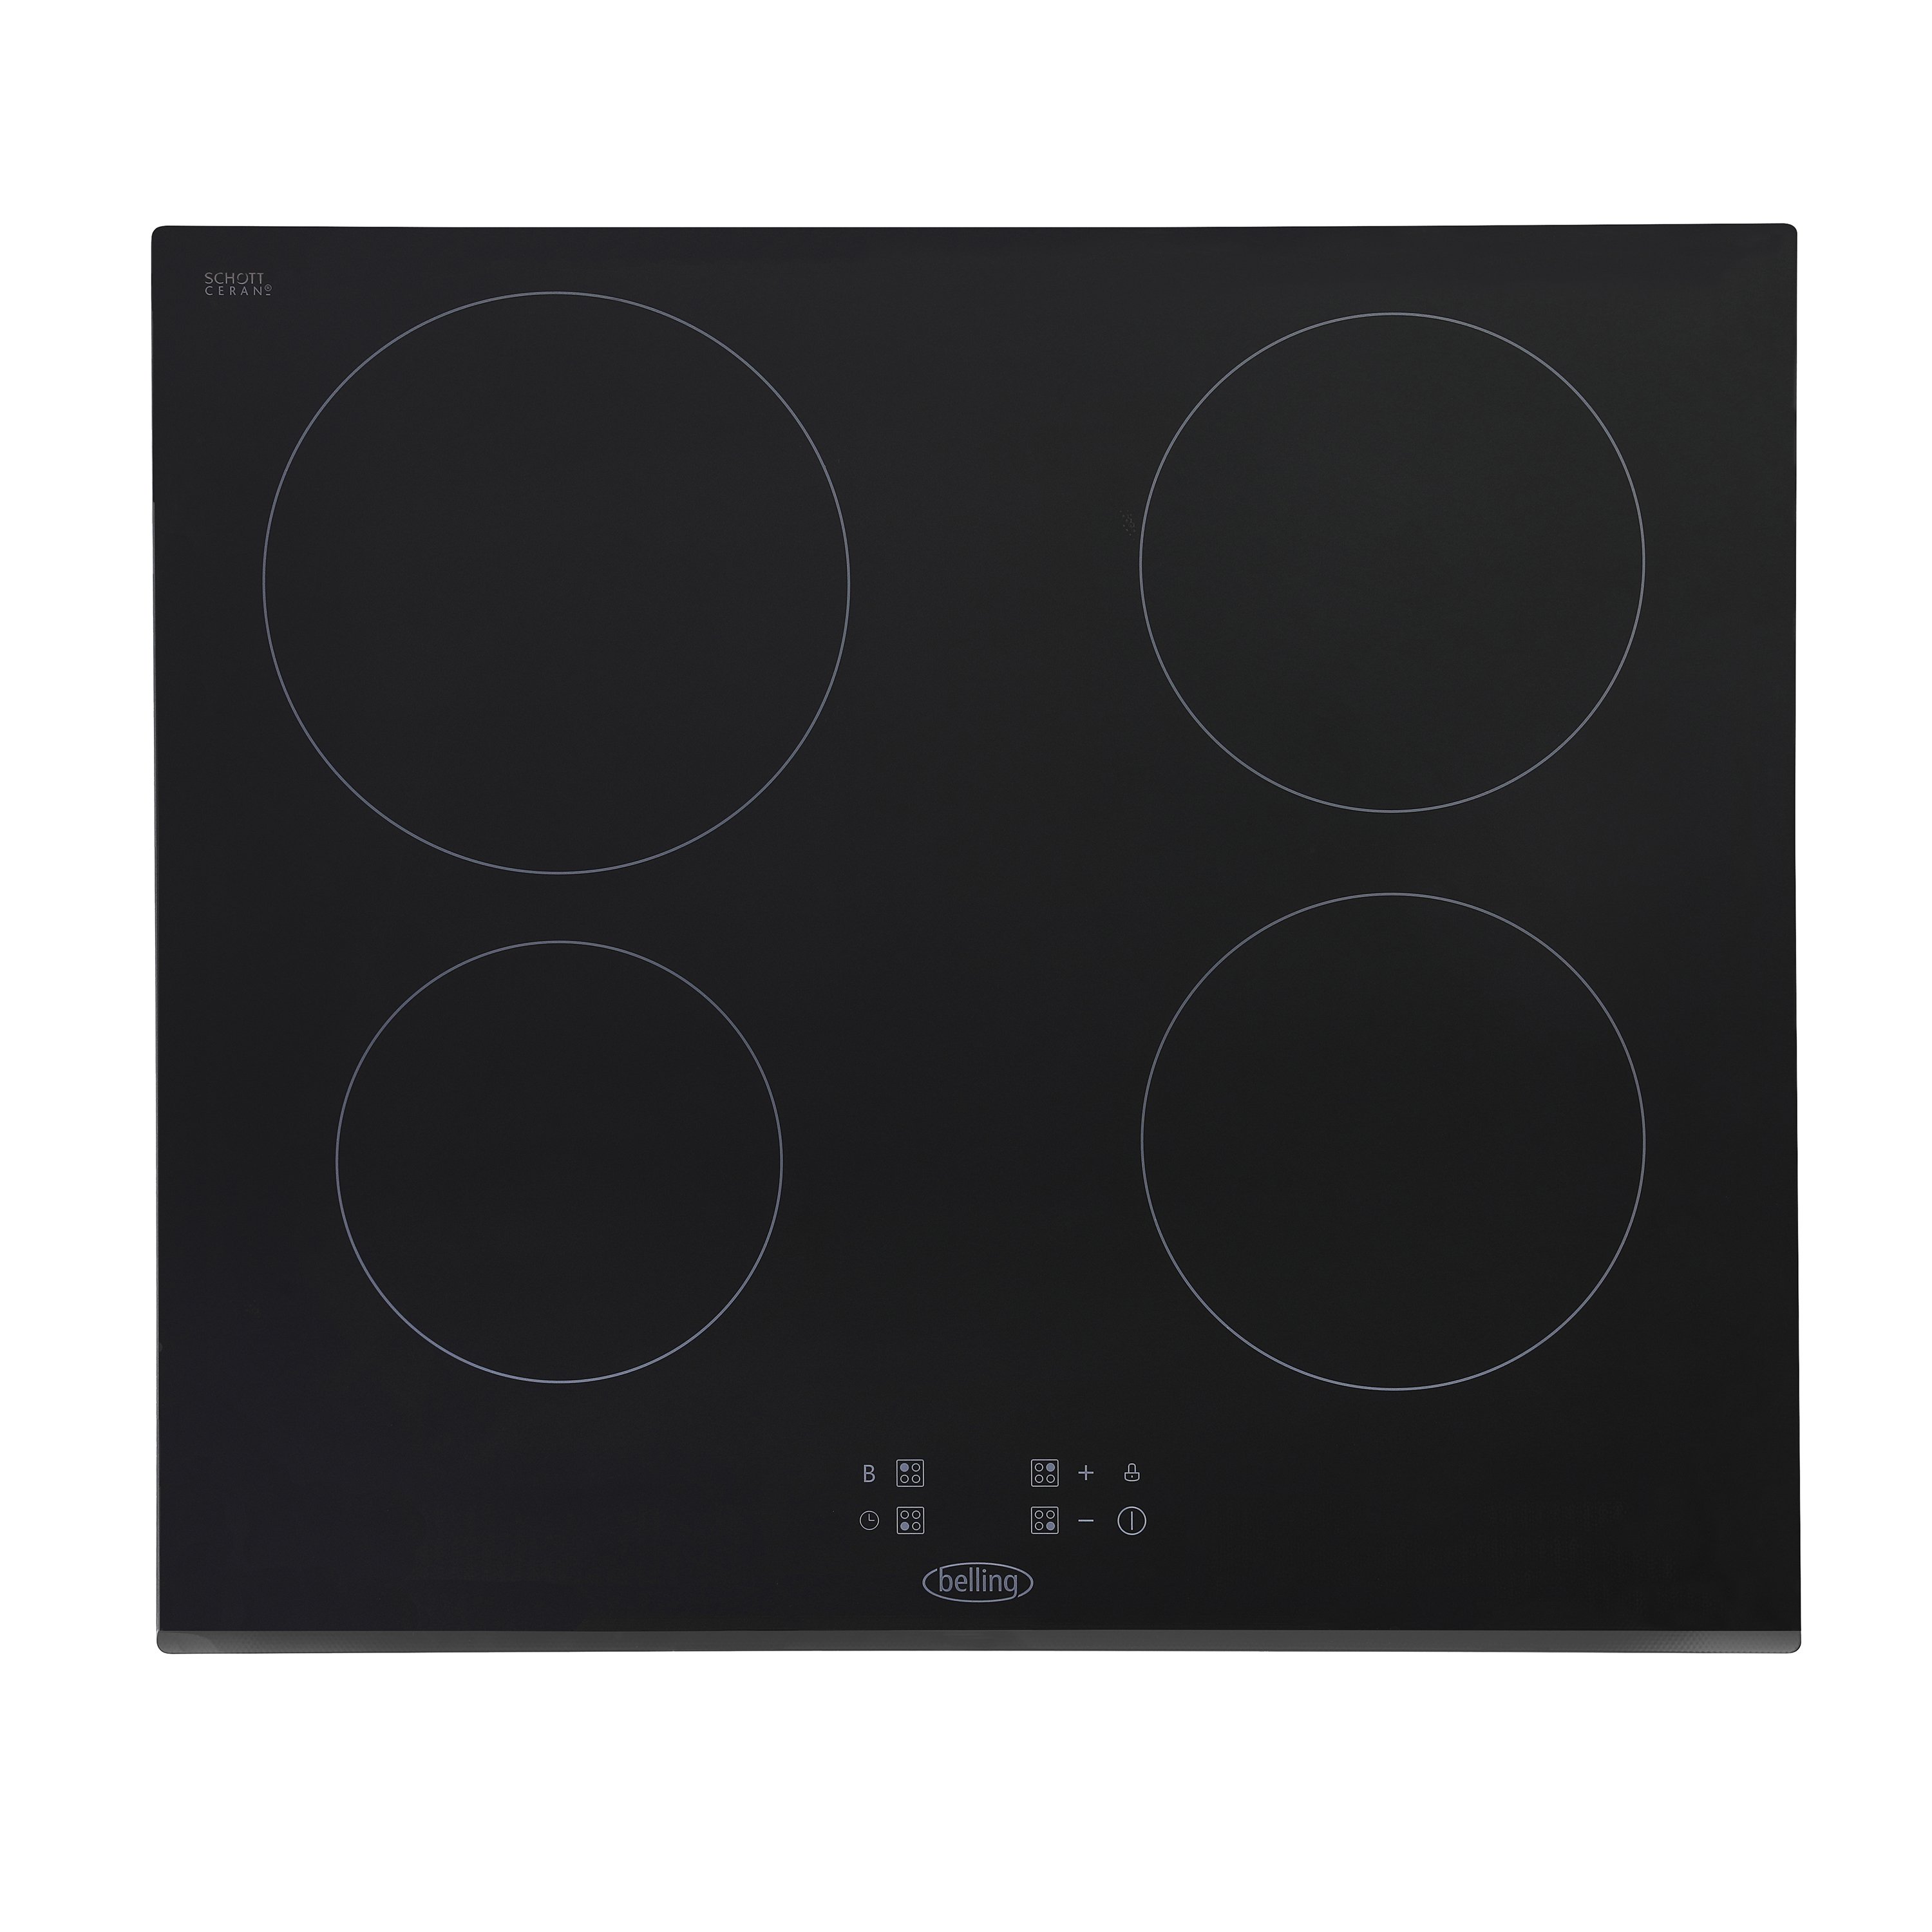 60cm touch control induction hob with nine power levels, timer, child lock & pan detection